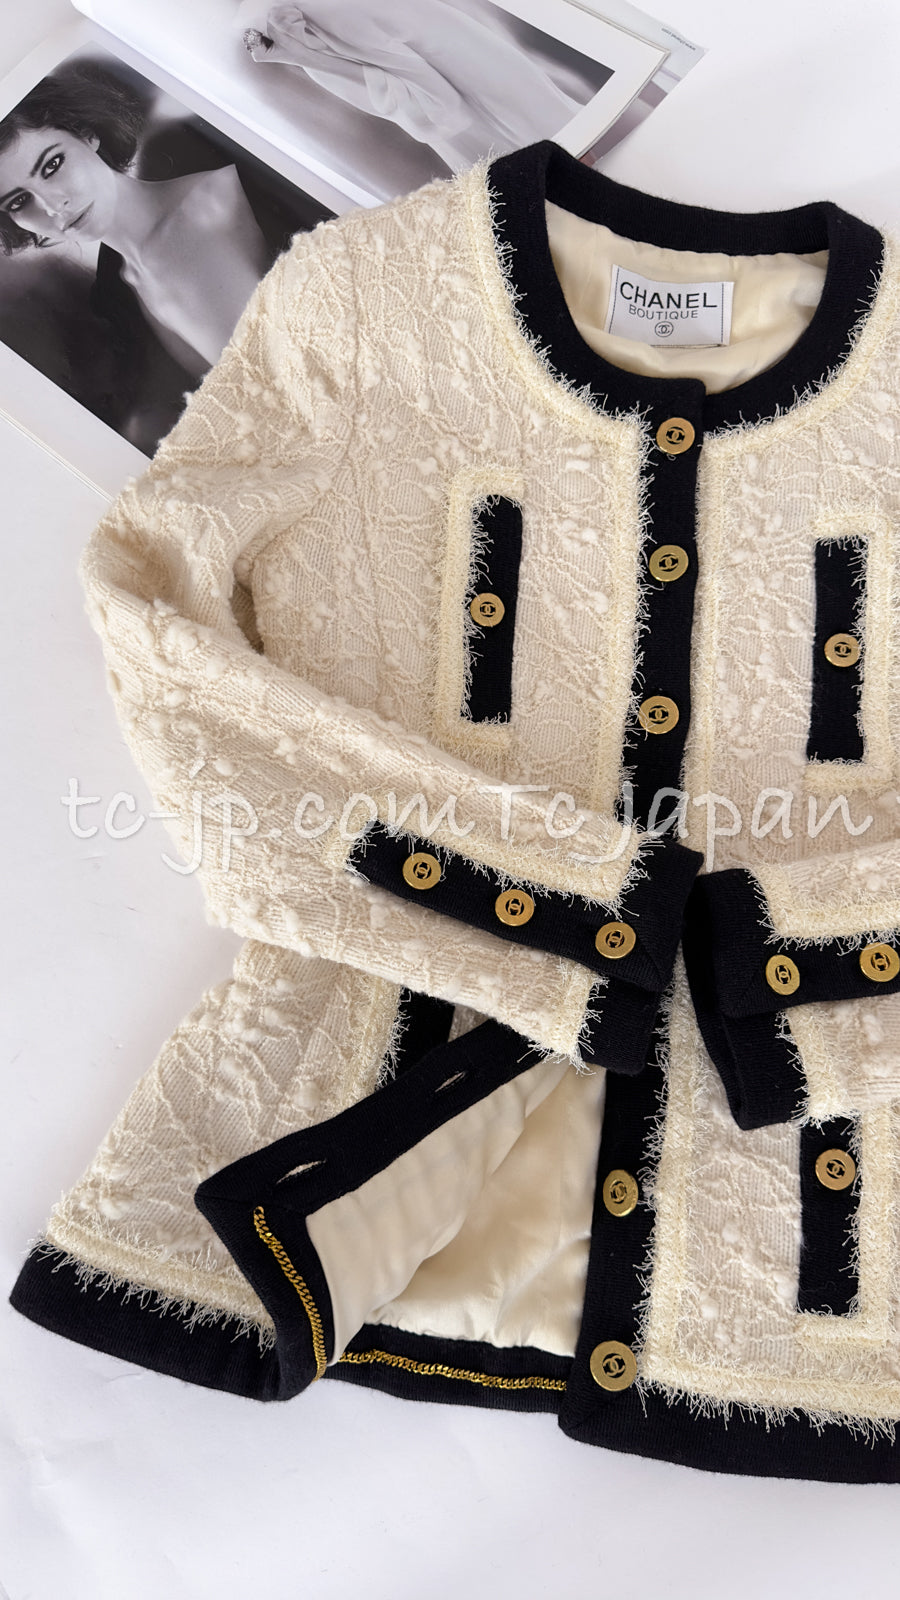 CHANEL 94A An Extremely Rare Collectible Signature Boucle Creme Ivory Black  Trim Vintage Jacket 36 38 40 シャネル スーパーモデルの幻